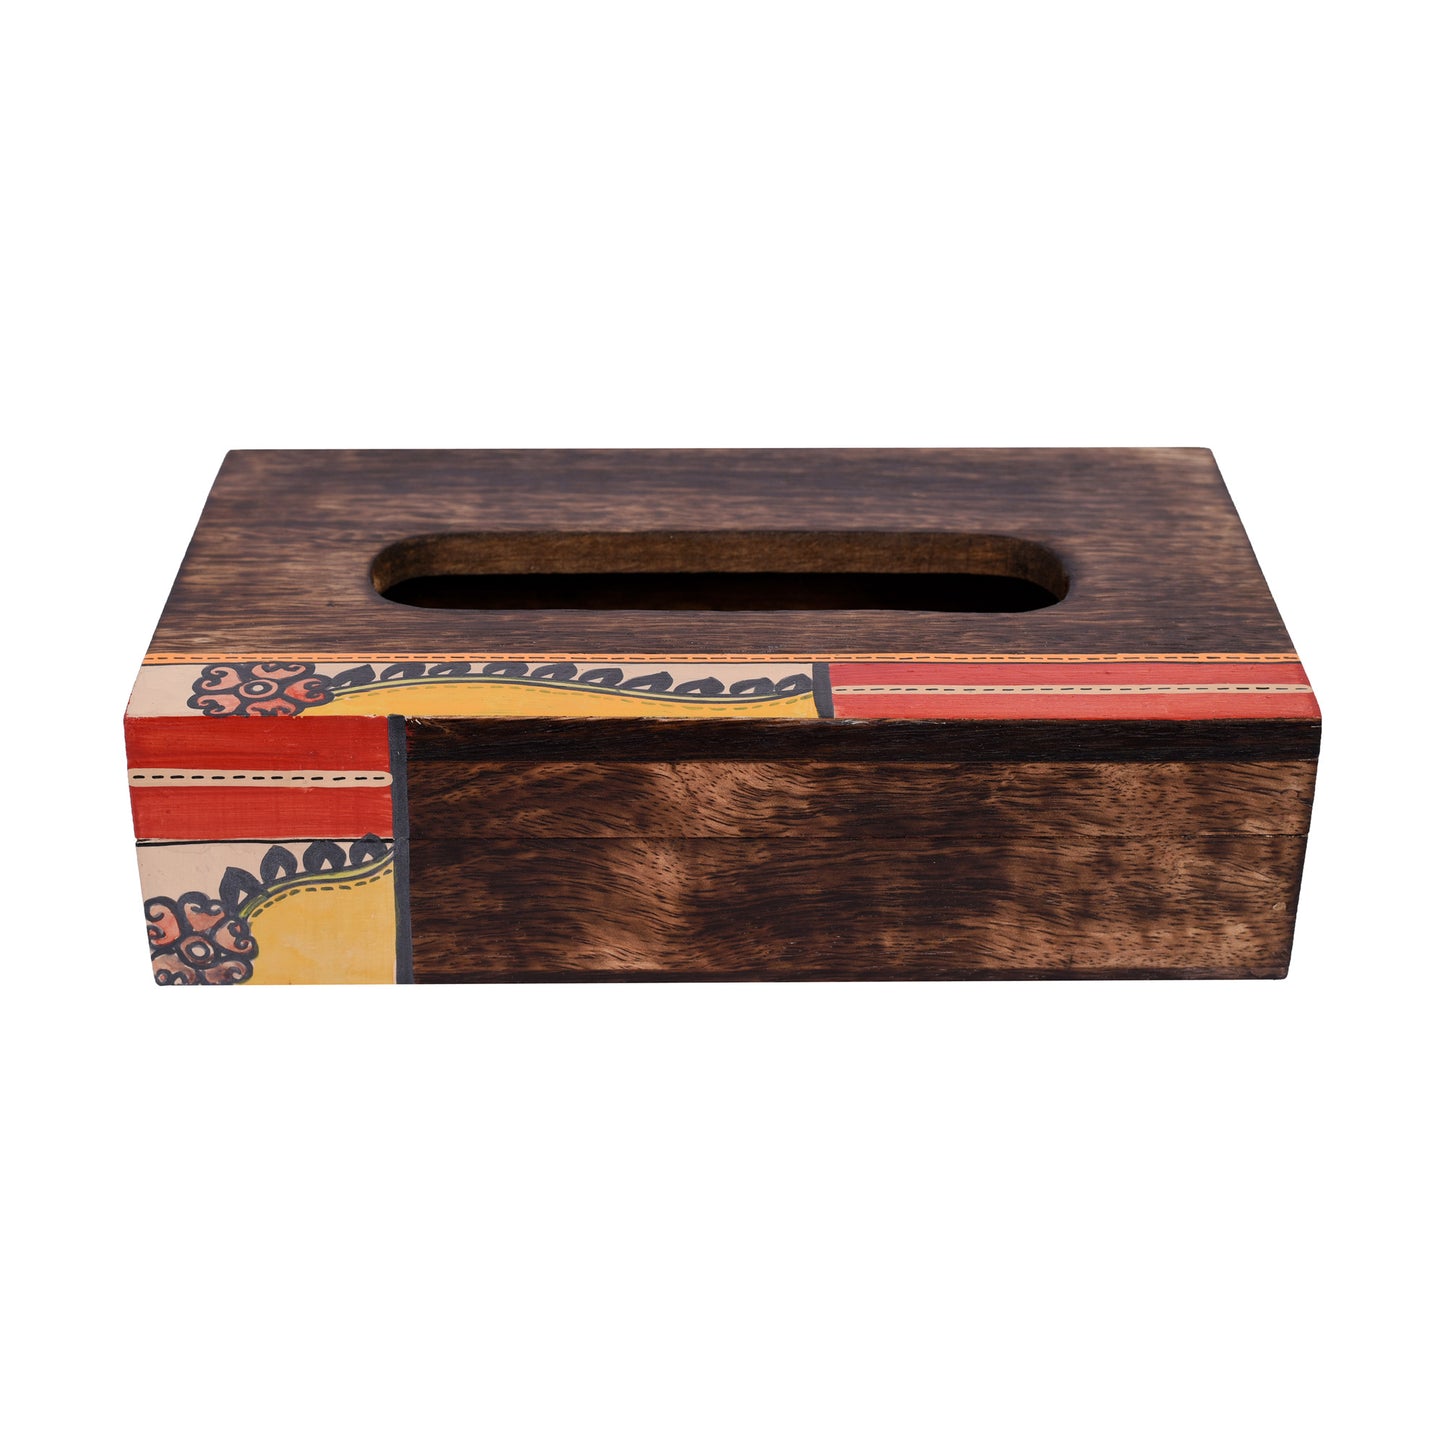 Tissue Box Handcrafted in Wood with Tribal Art Flower Design (9x5x2.5")